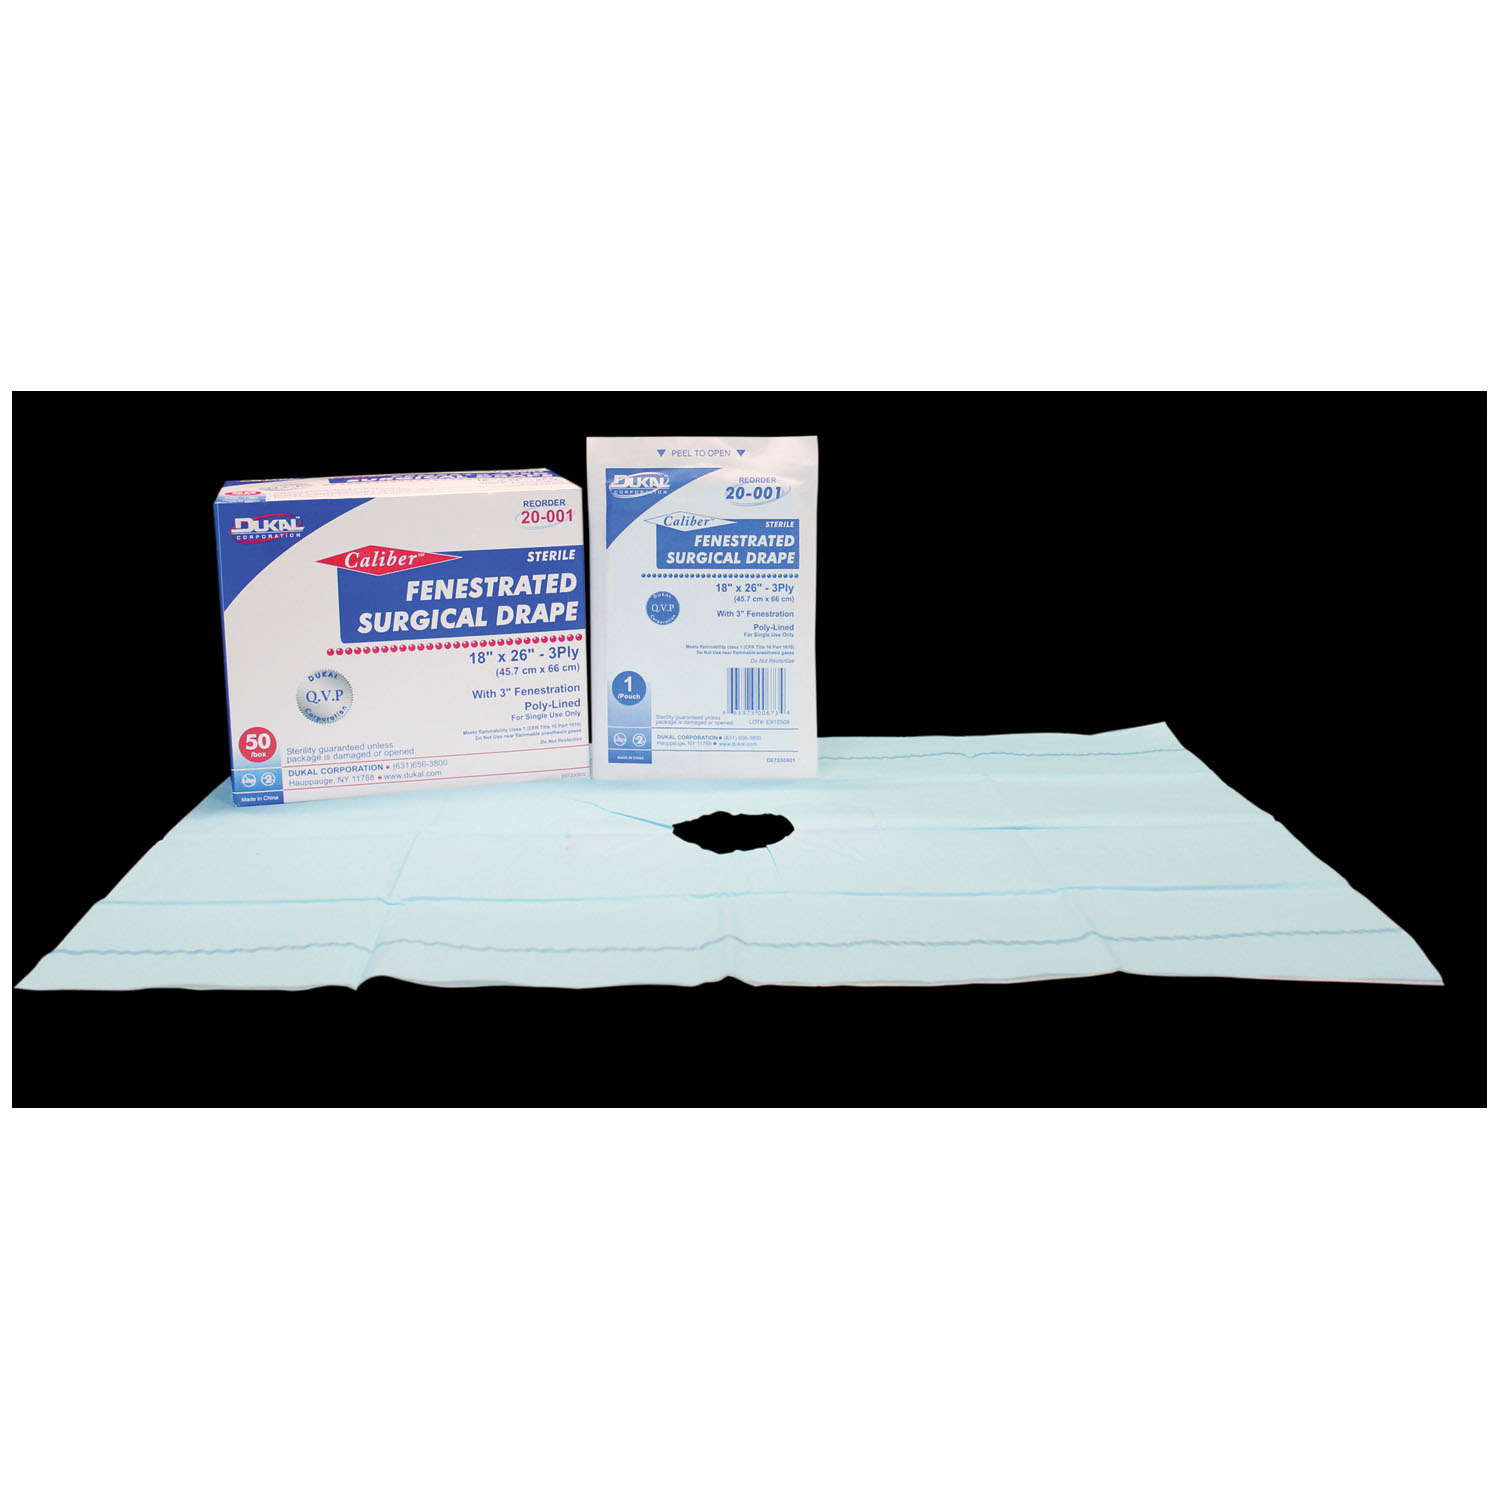 DUKAL SURGICAL DRAPES : 20-002 BX $20.50 Stocked